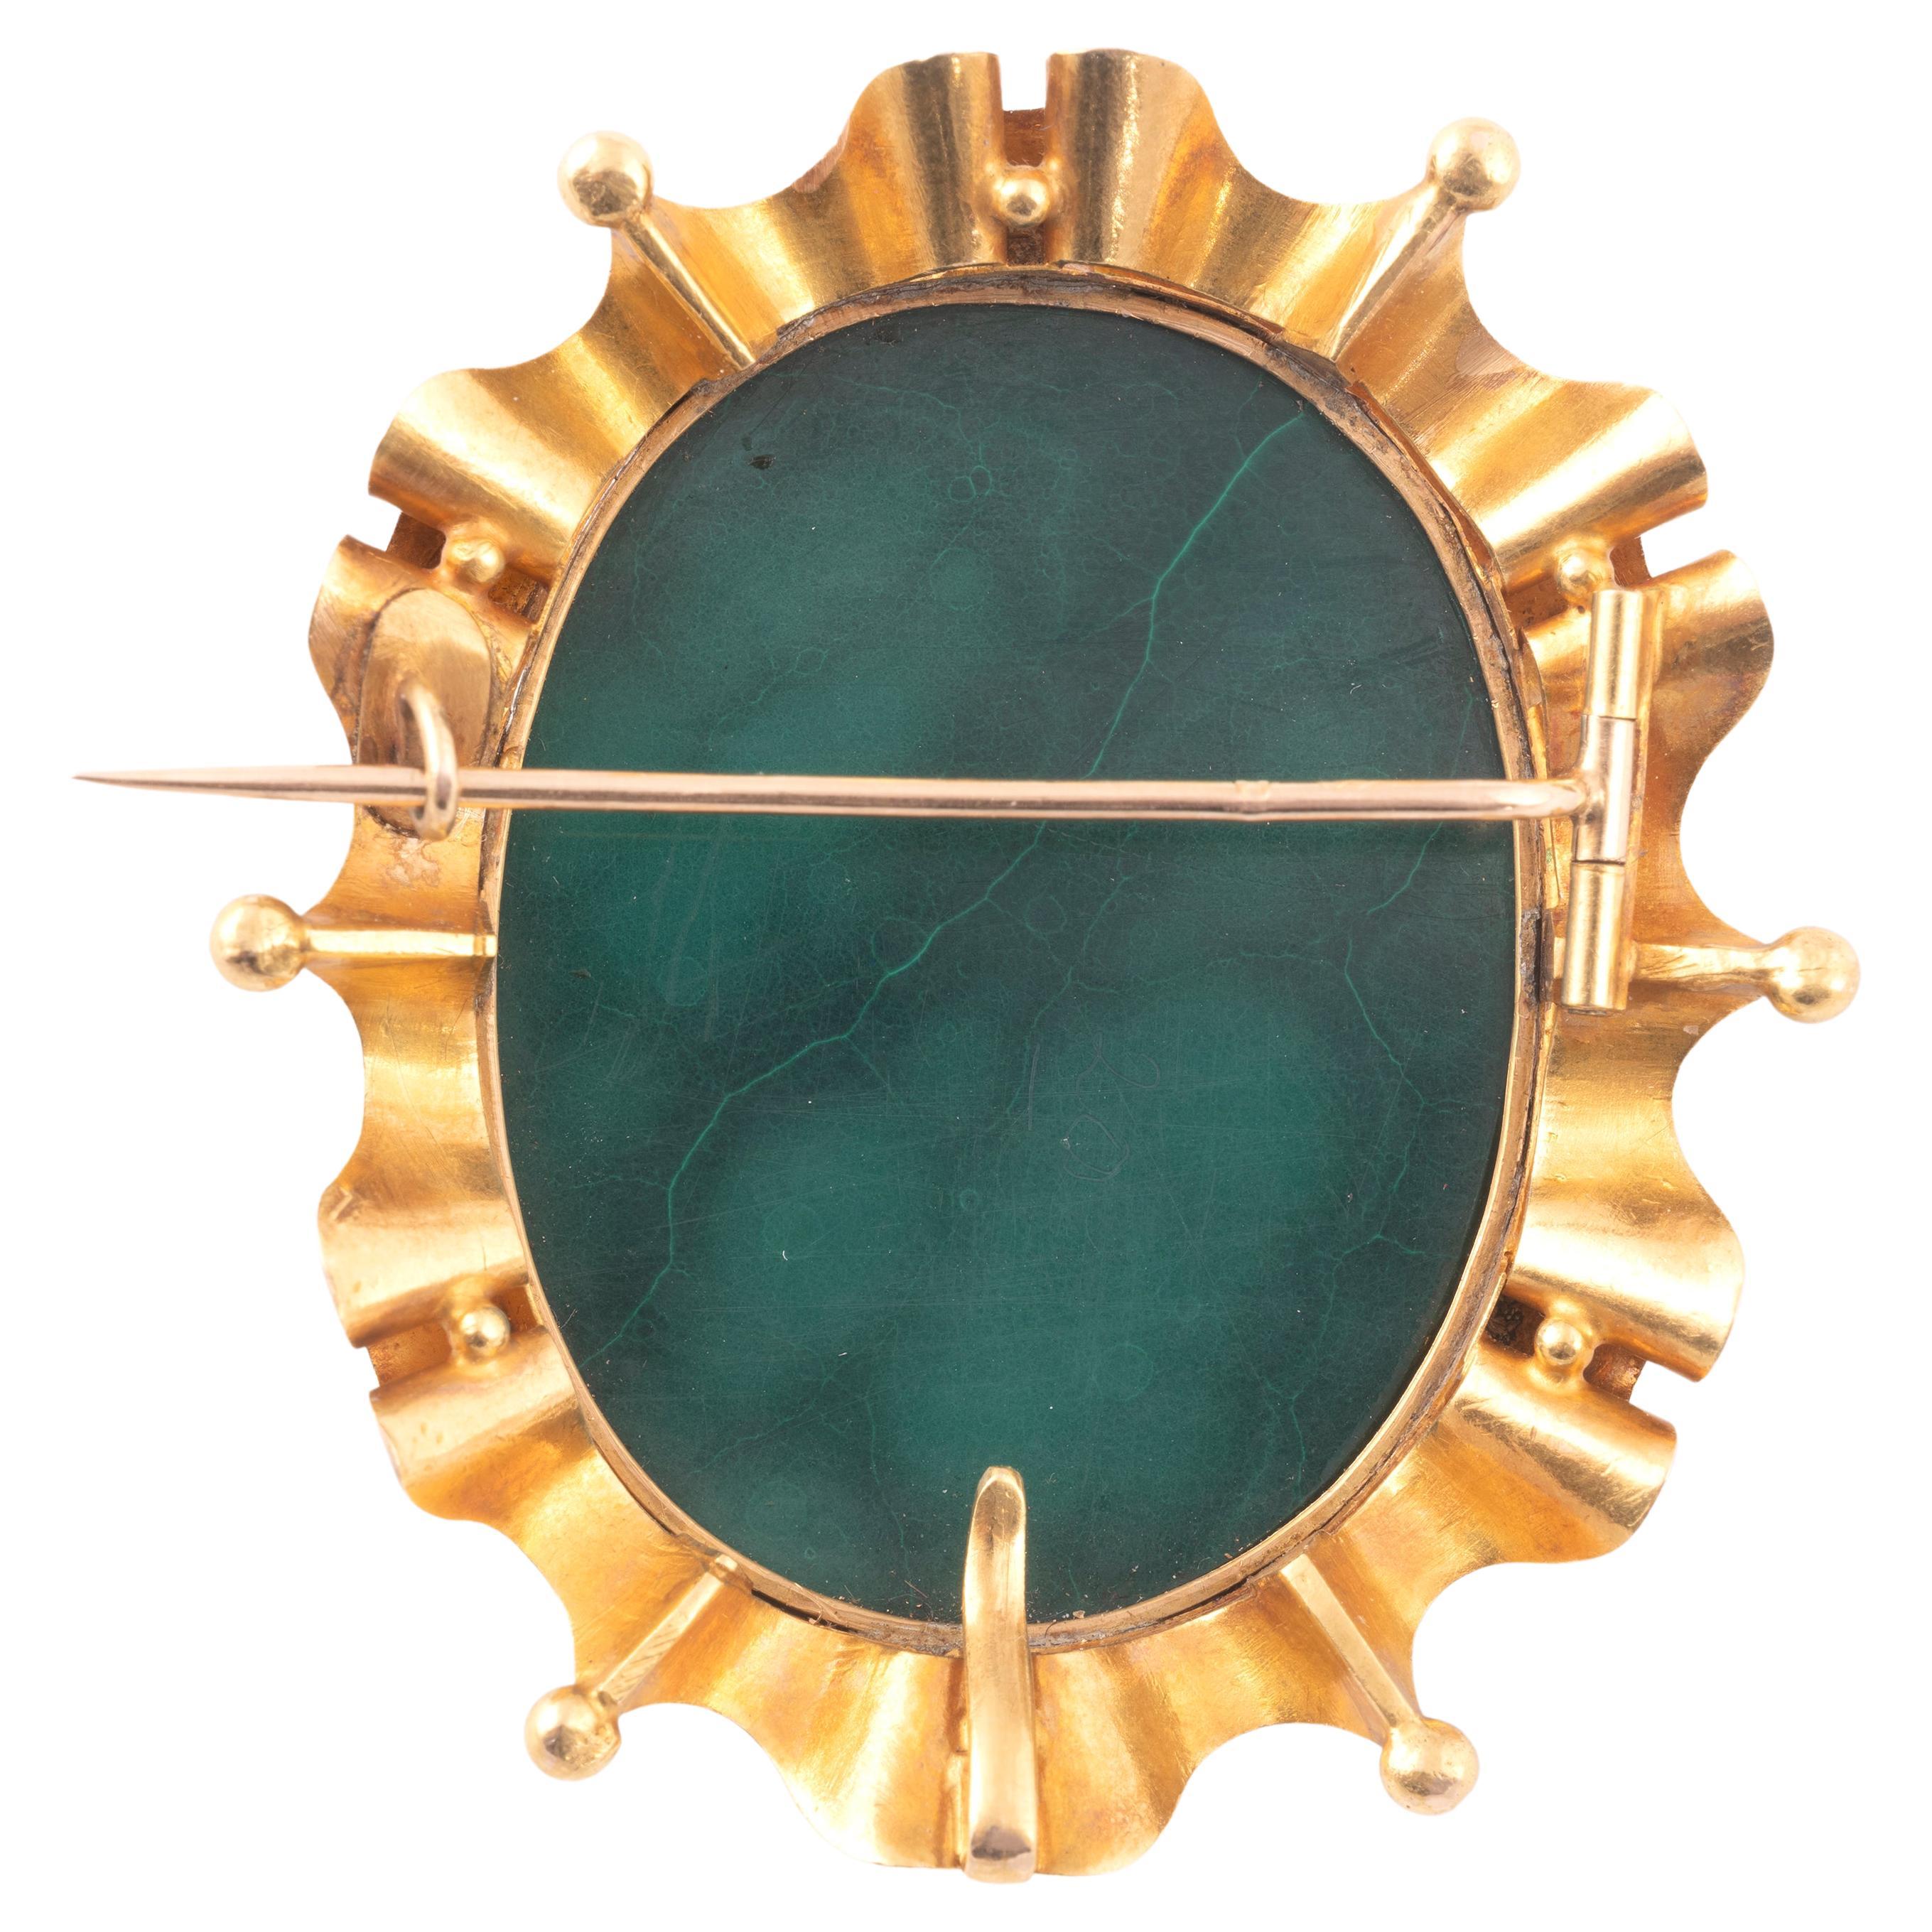 Ruffled oval brooch, which can form a collar watch holder, in 18kt yellow gold centered with a cameo on malachite depicting Cupid in profile, his head turned, holding his loose bow, in closed setting, and surrounded by a ribbon, partially beaded,